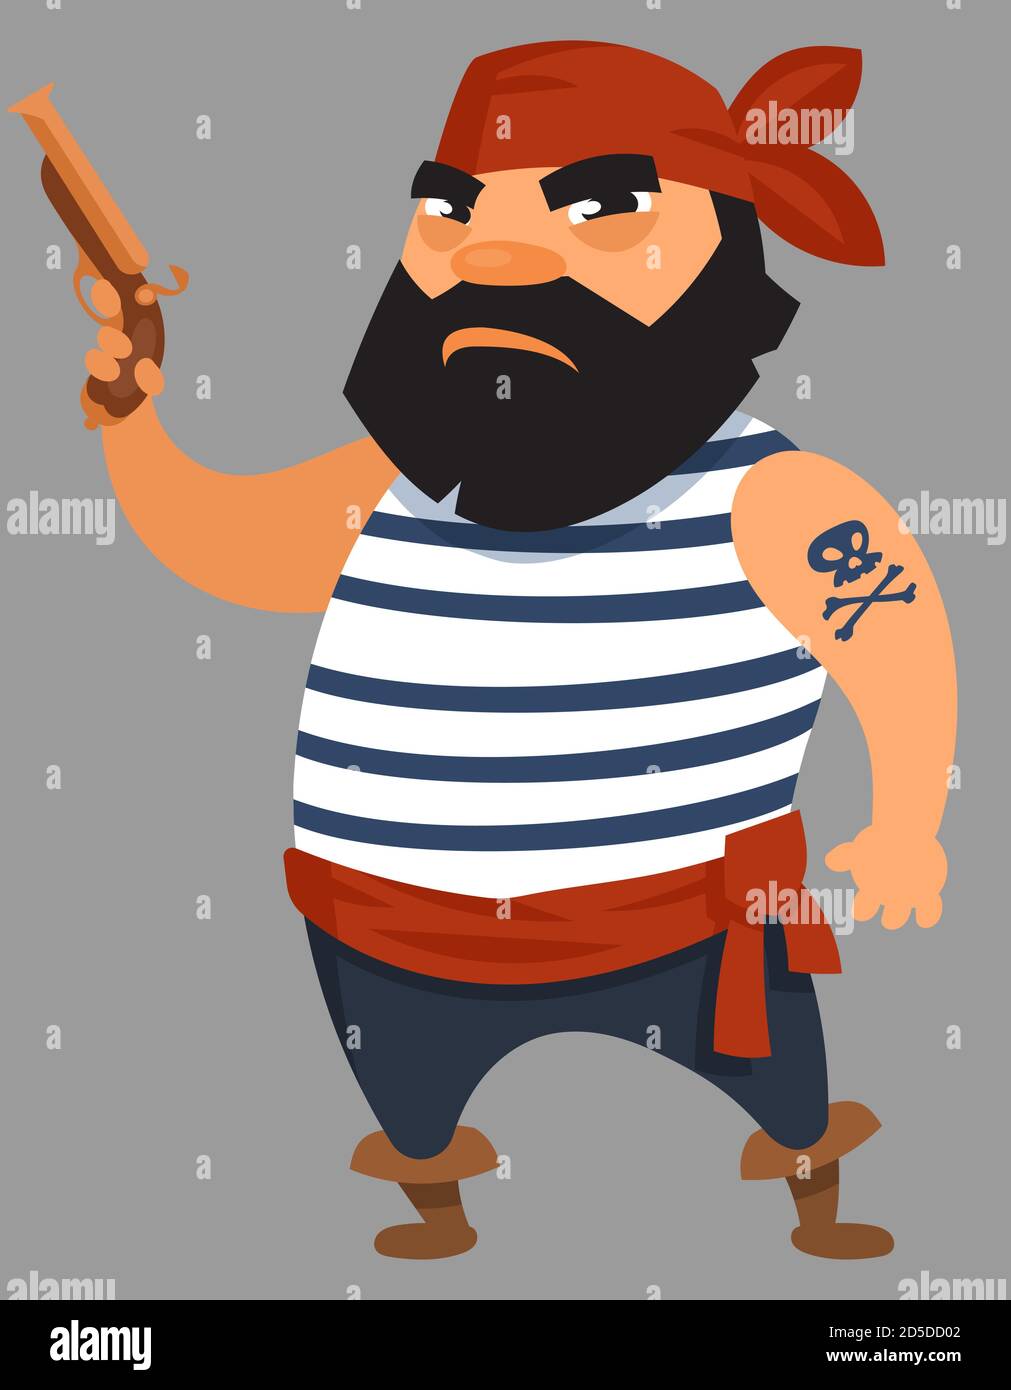 Pirate holding pistol. Male character in cartoon style. Stock Vector